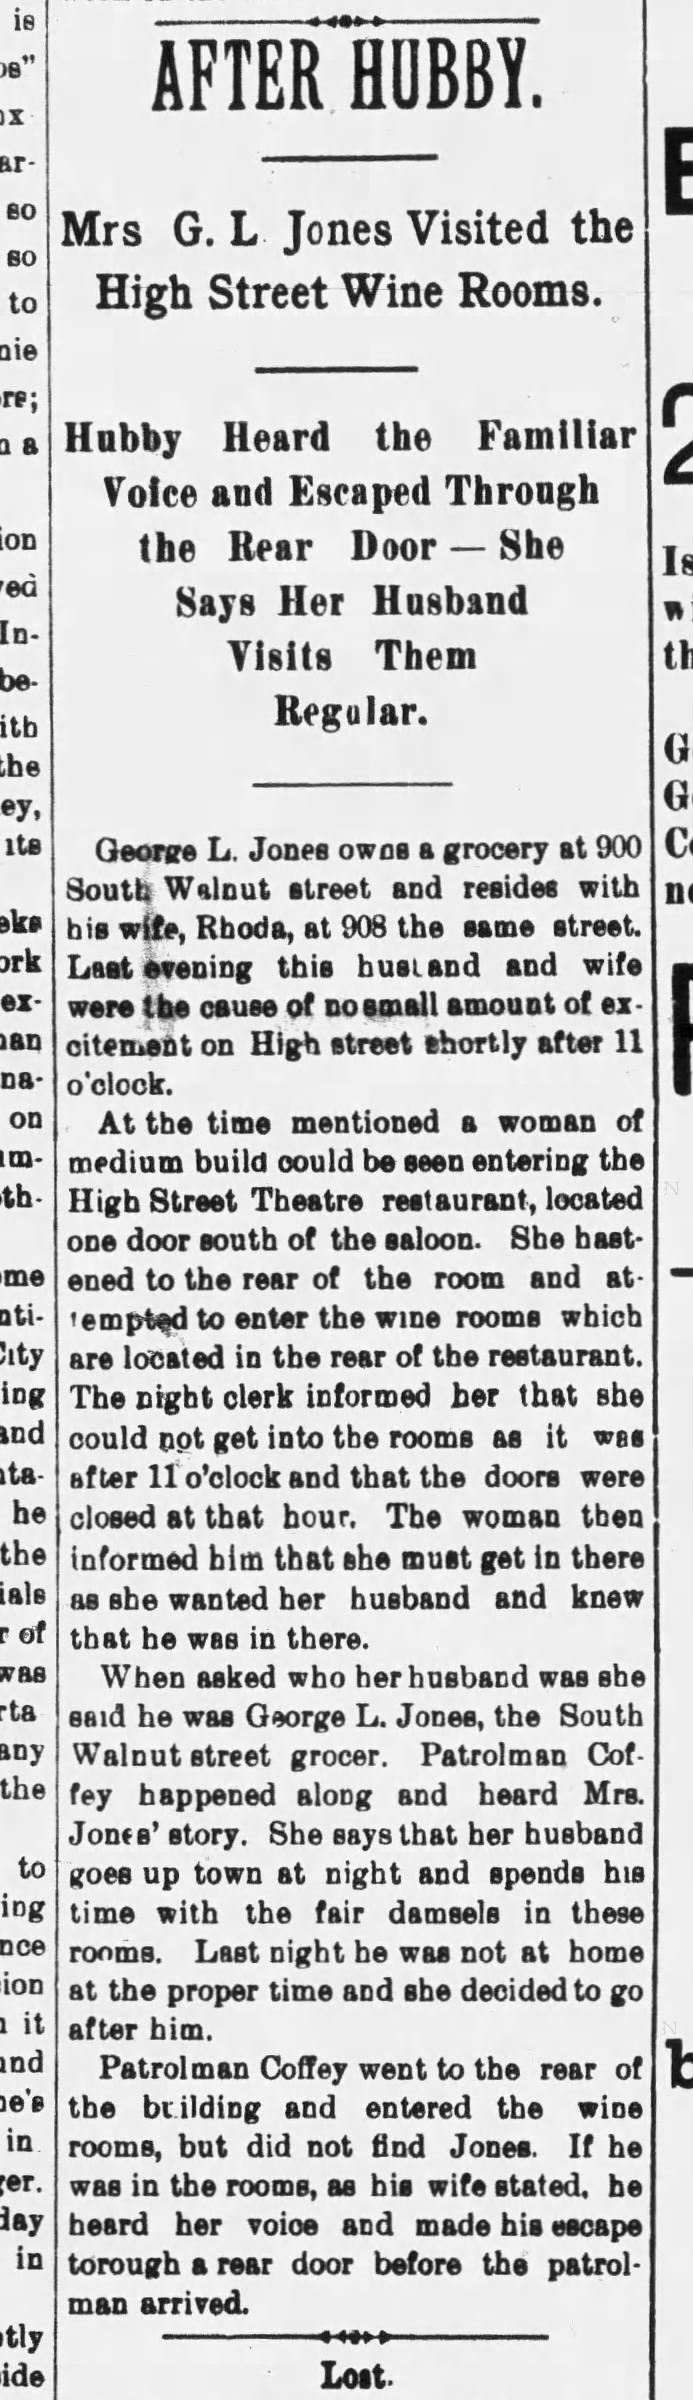 “After Hubby,” The Muncie Morning News, April 5, 1895